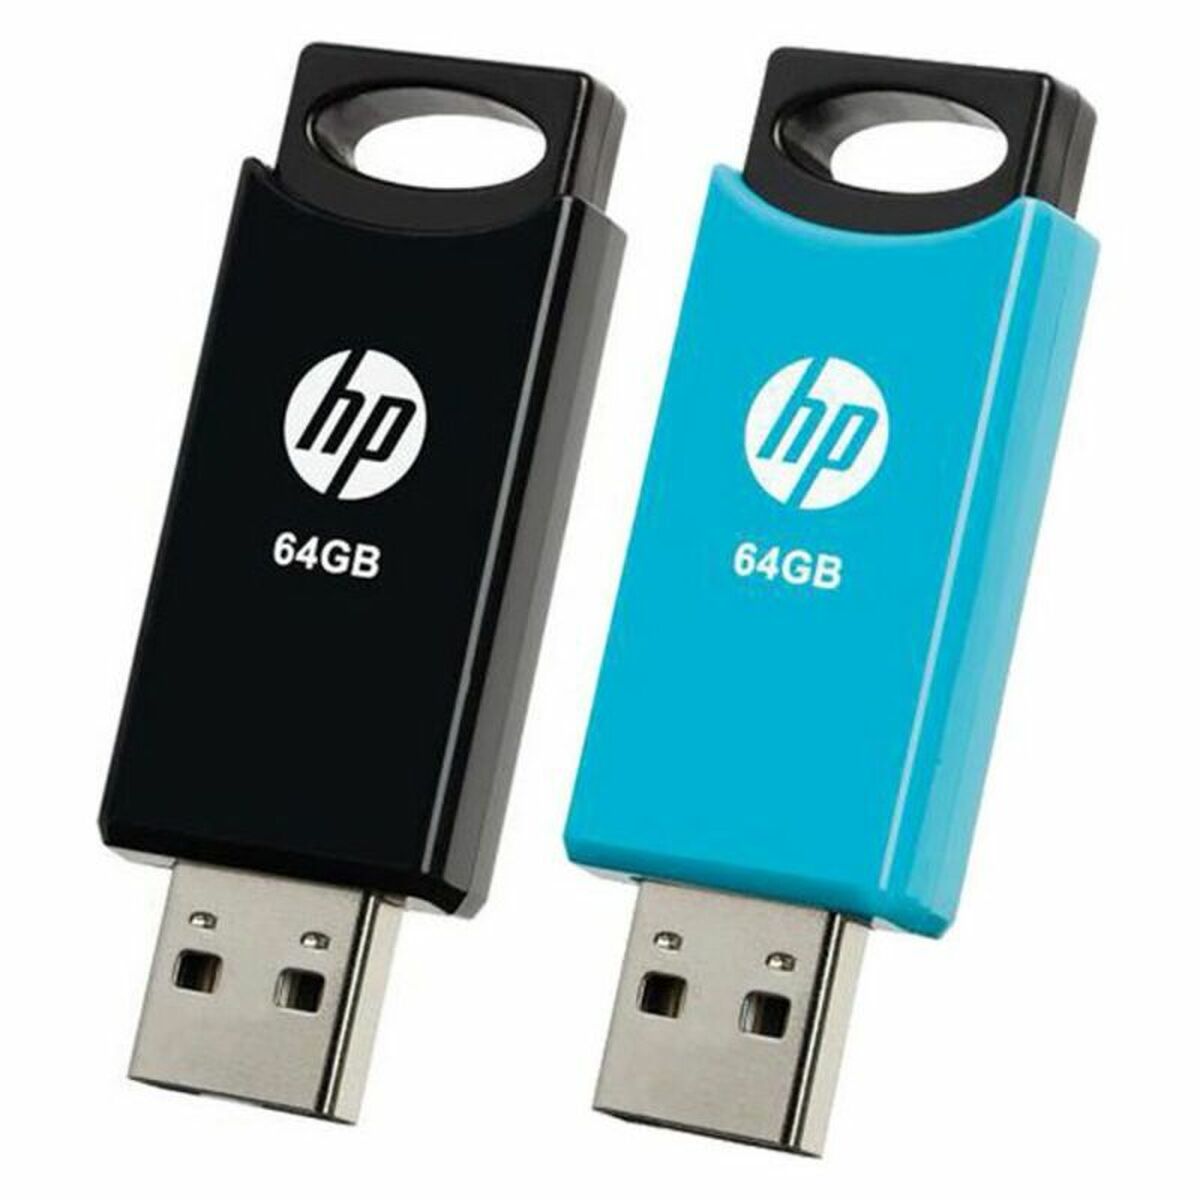 USB stick HP 212 USB 2.0 (2 uds), HP, Computing, Data storage, usb-stick-hp-212-usb-2-0-blue-black-2-uds, :32 GB, :64 GB, Brand_HP, Capacity_32 GB, Capacity_64 GB, category-reference-2609, category-reference-2803, category-reference-2817, category-reference-t-19685, category-reference-t-19909, category-reference-t-21355, computers / components, Condition_NEW, Price_20 - 50, Teleworking, RiotNook